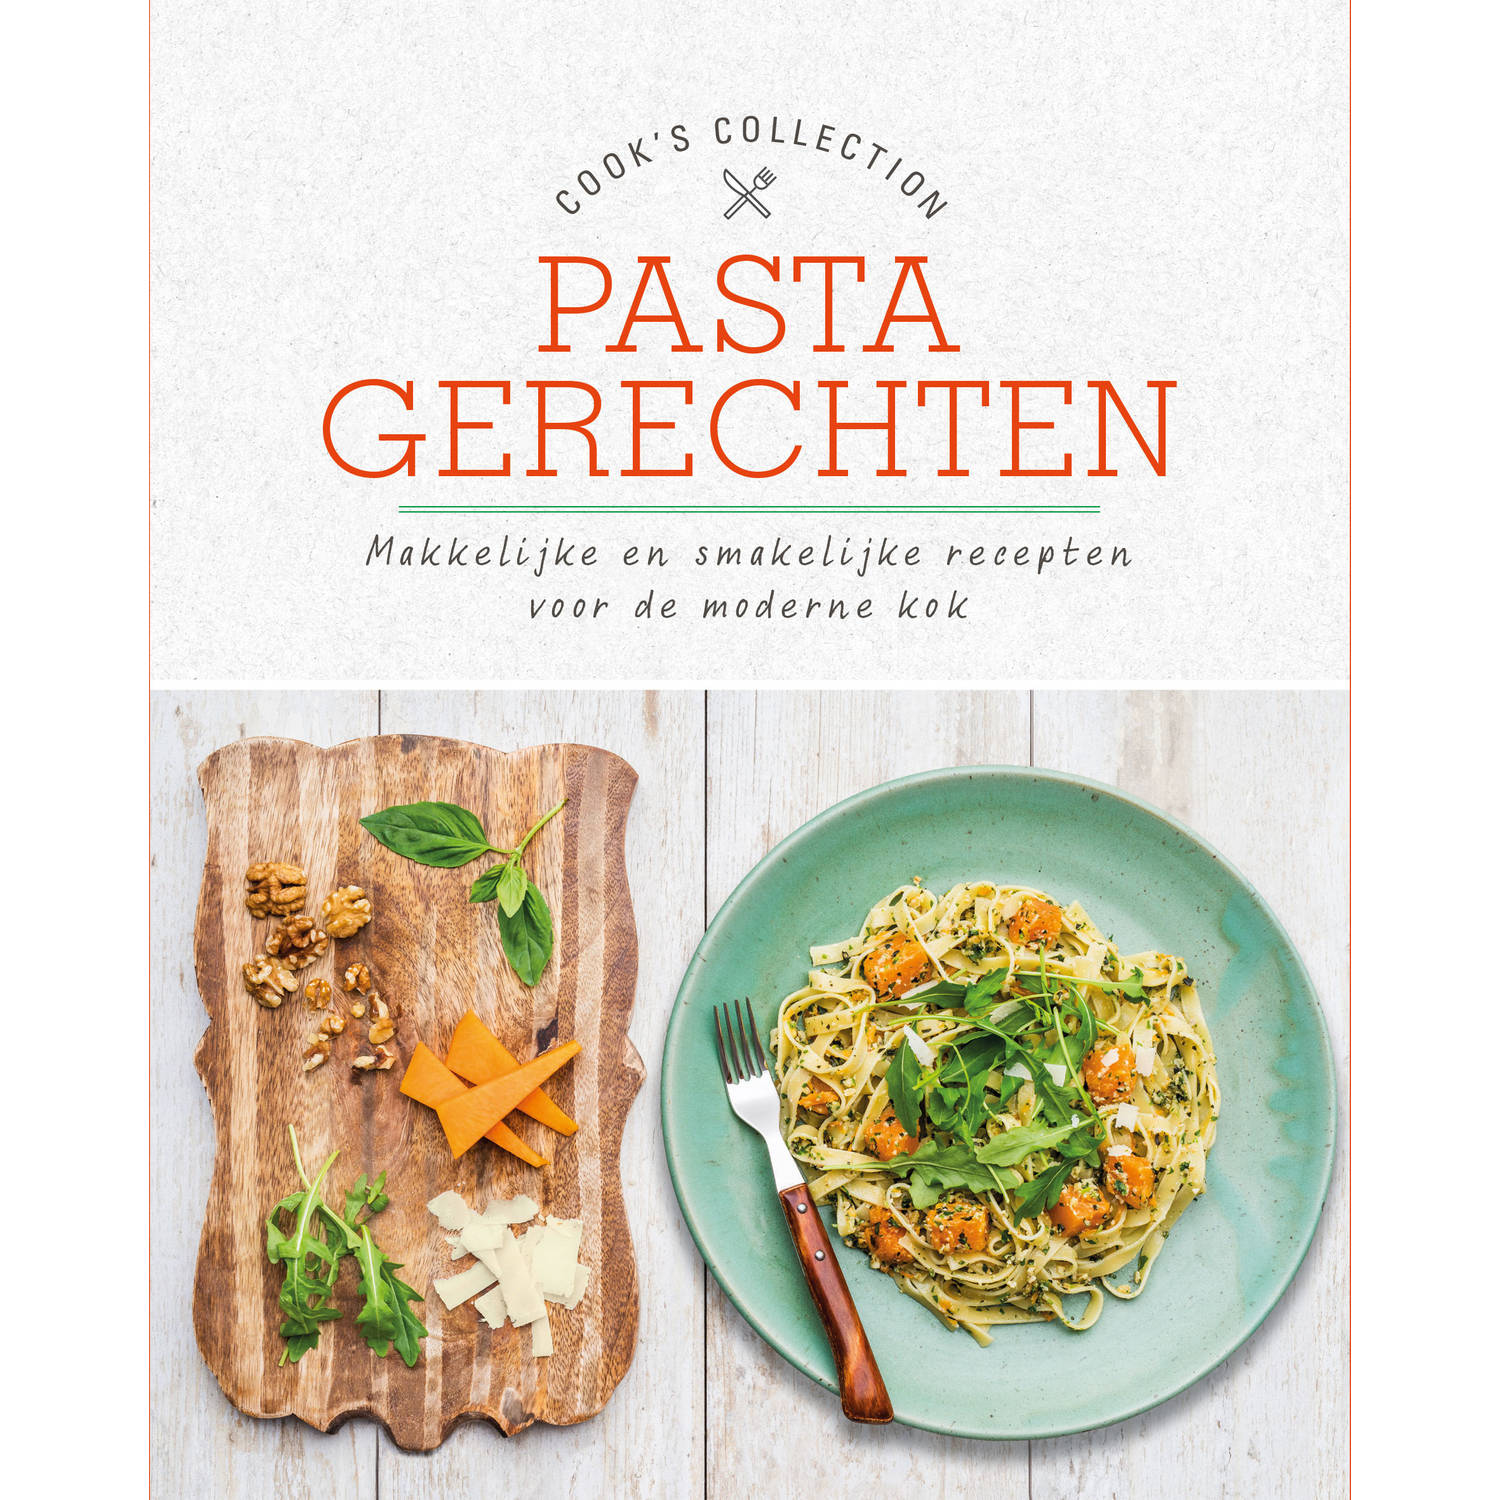 Rebo Cook's collection Pastagerechten